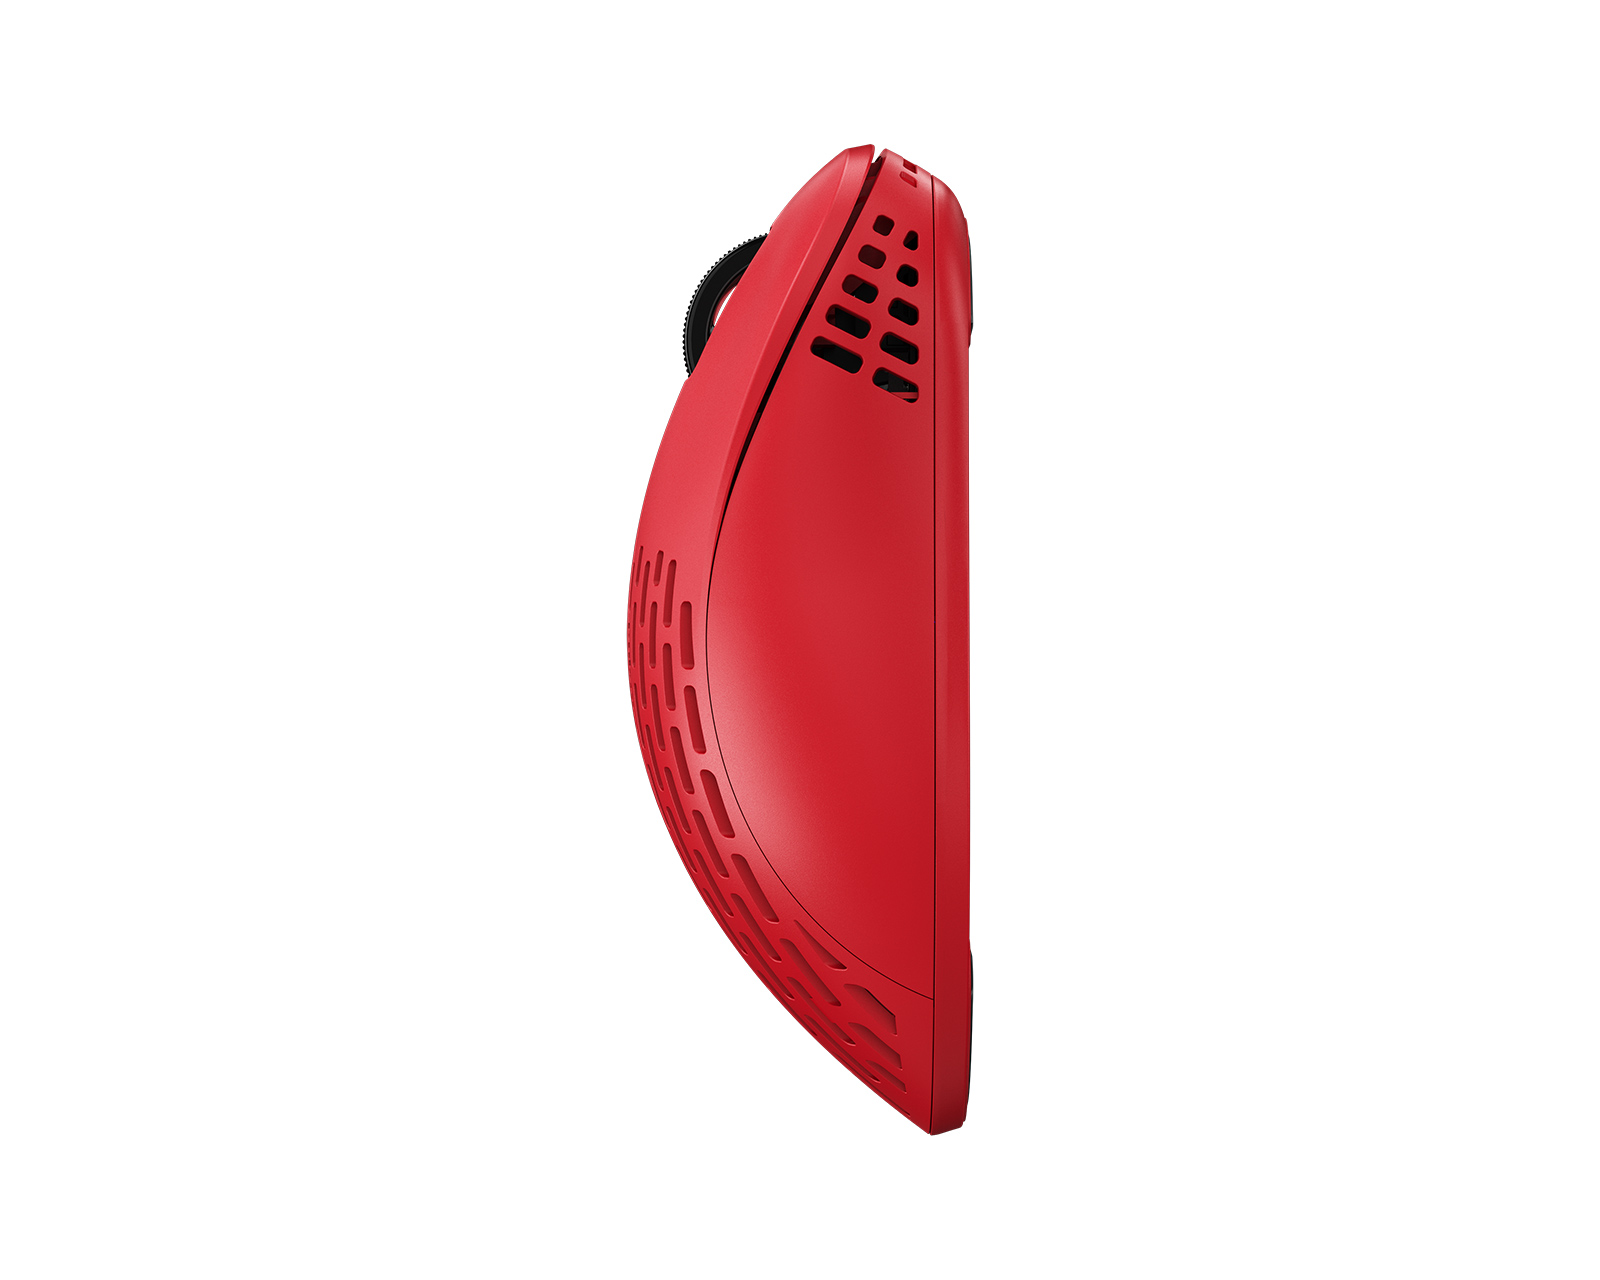 Pulsar Xlite Wireless v2 Mini Gaming Mouse - Red - Limited Edition